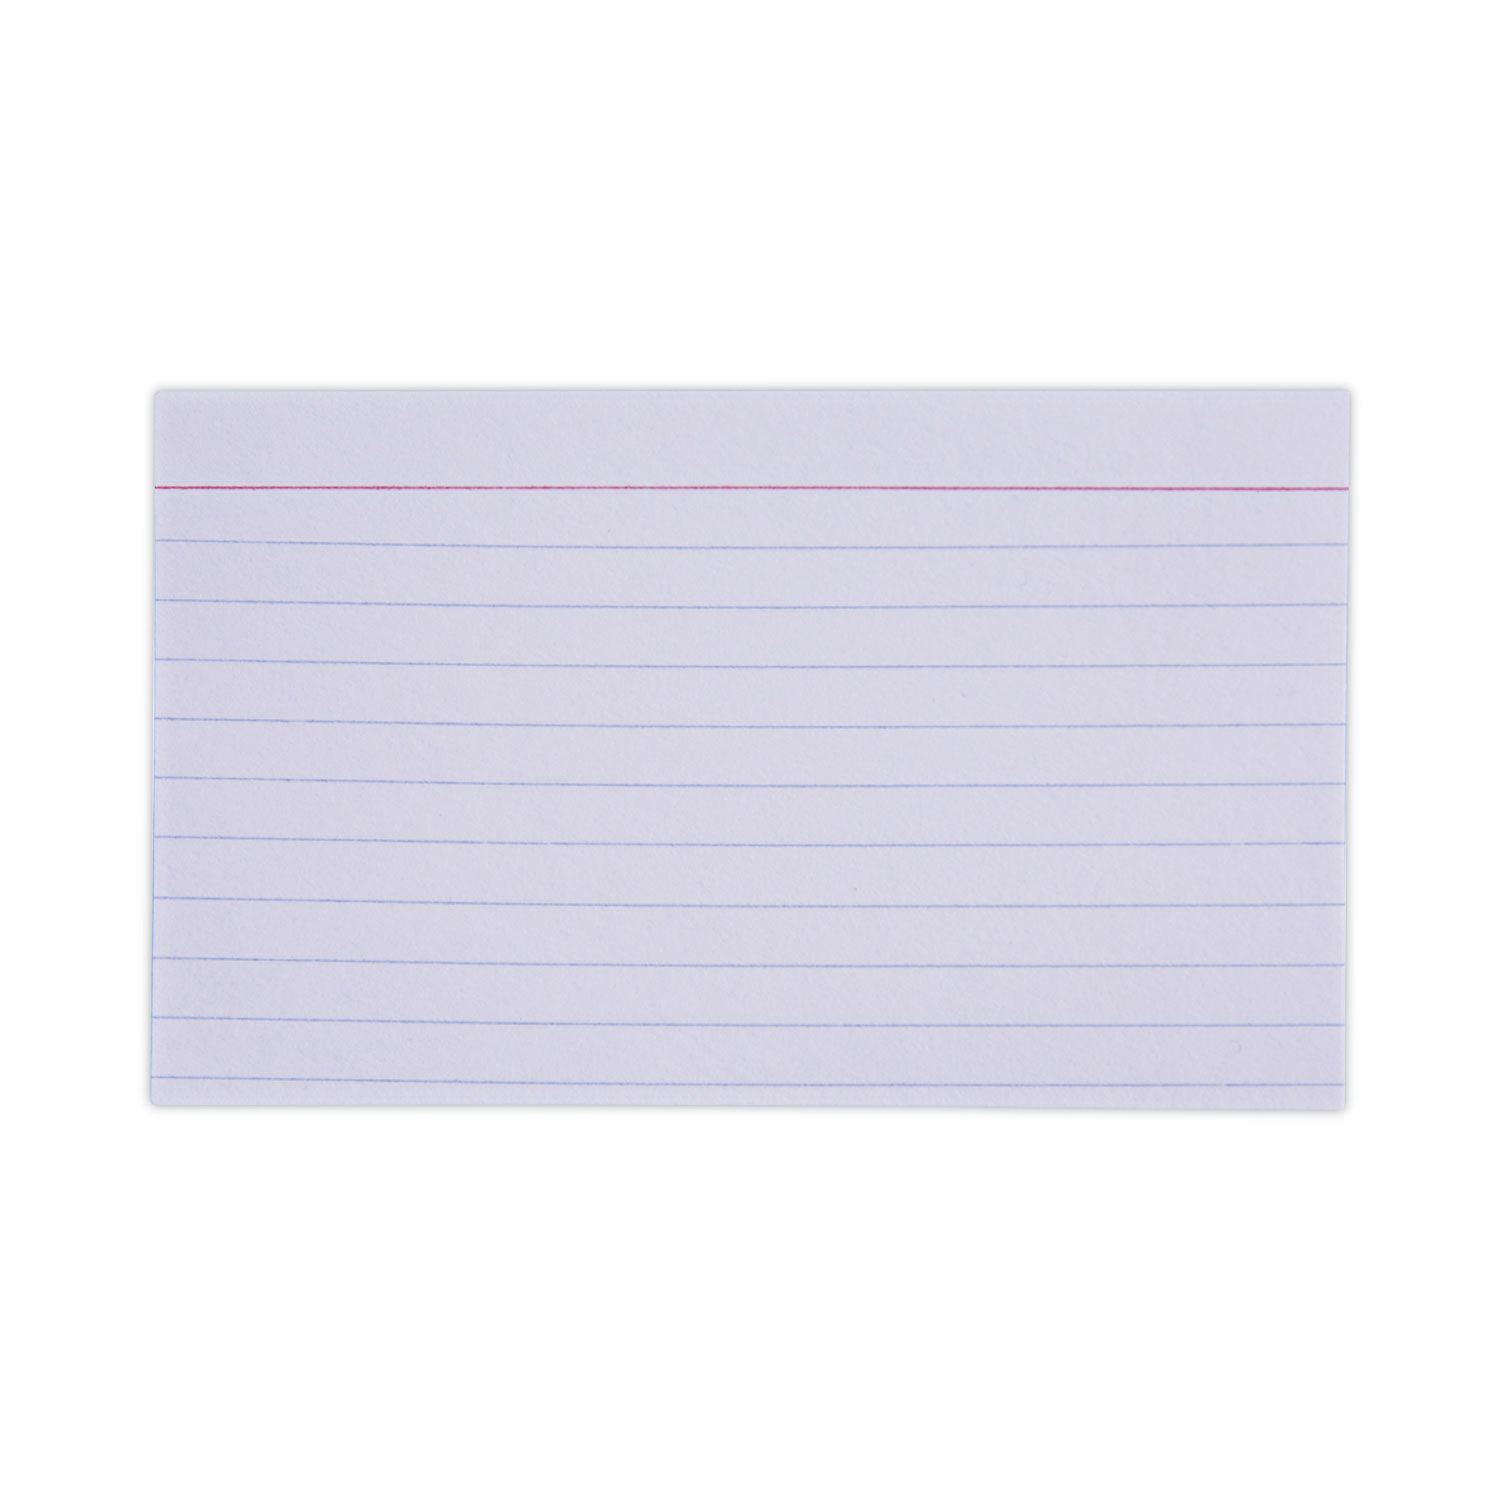 Ruled Index Cards 3 x 5, White, 100/Pack